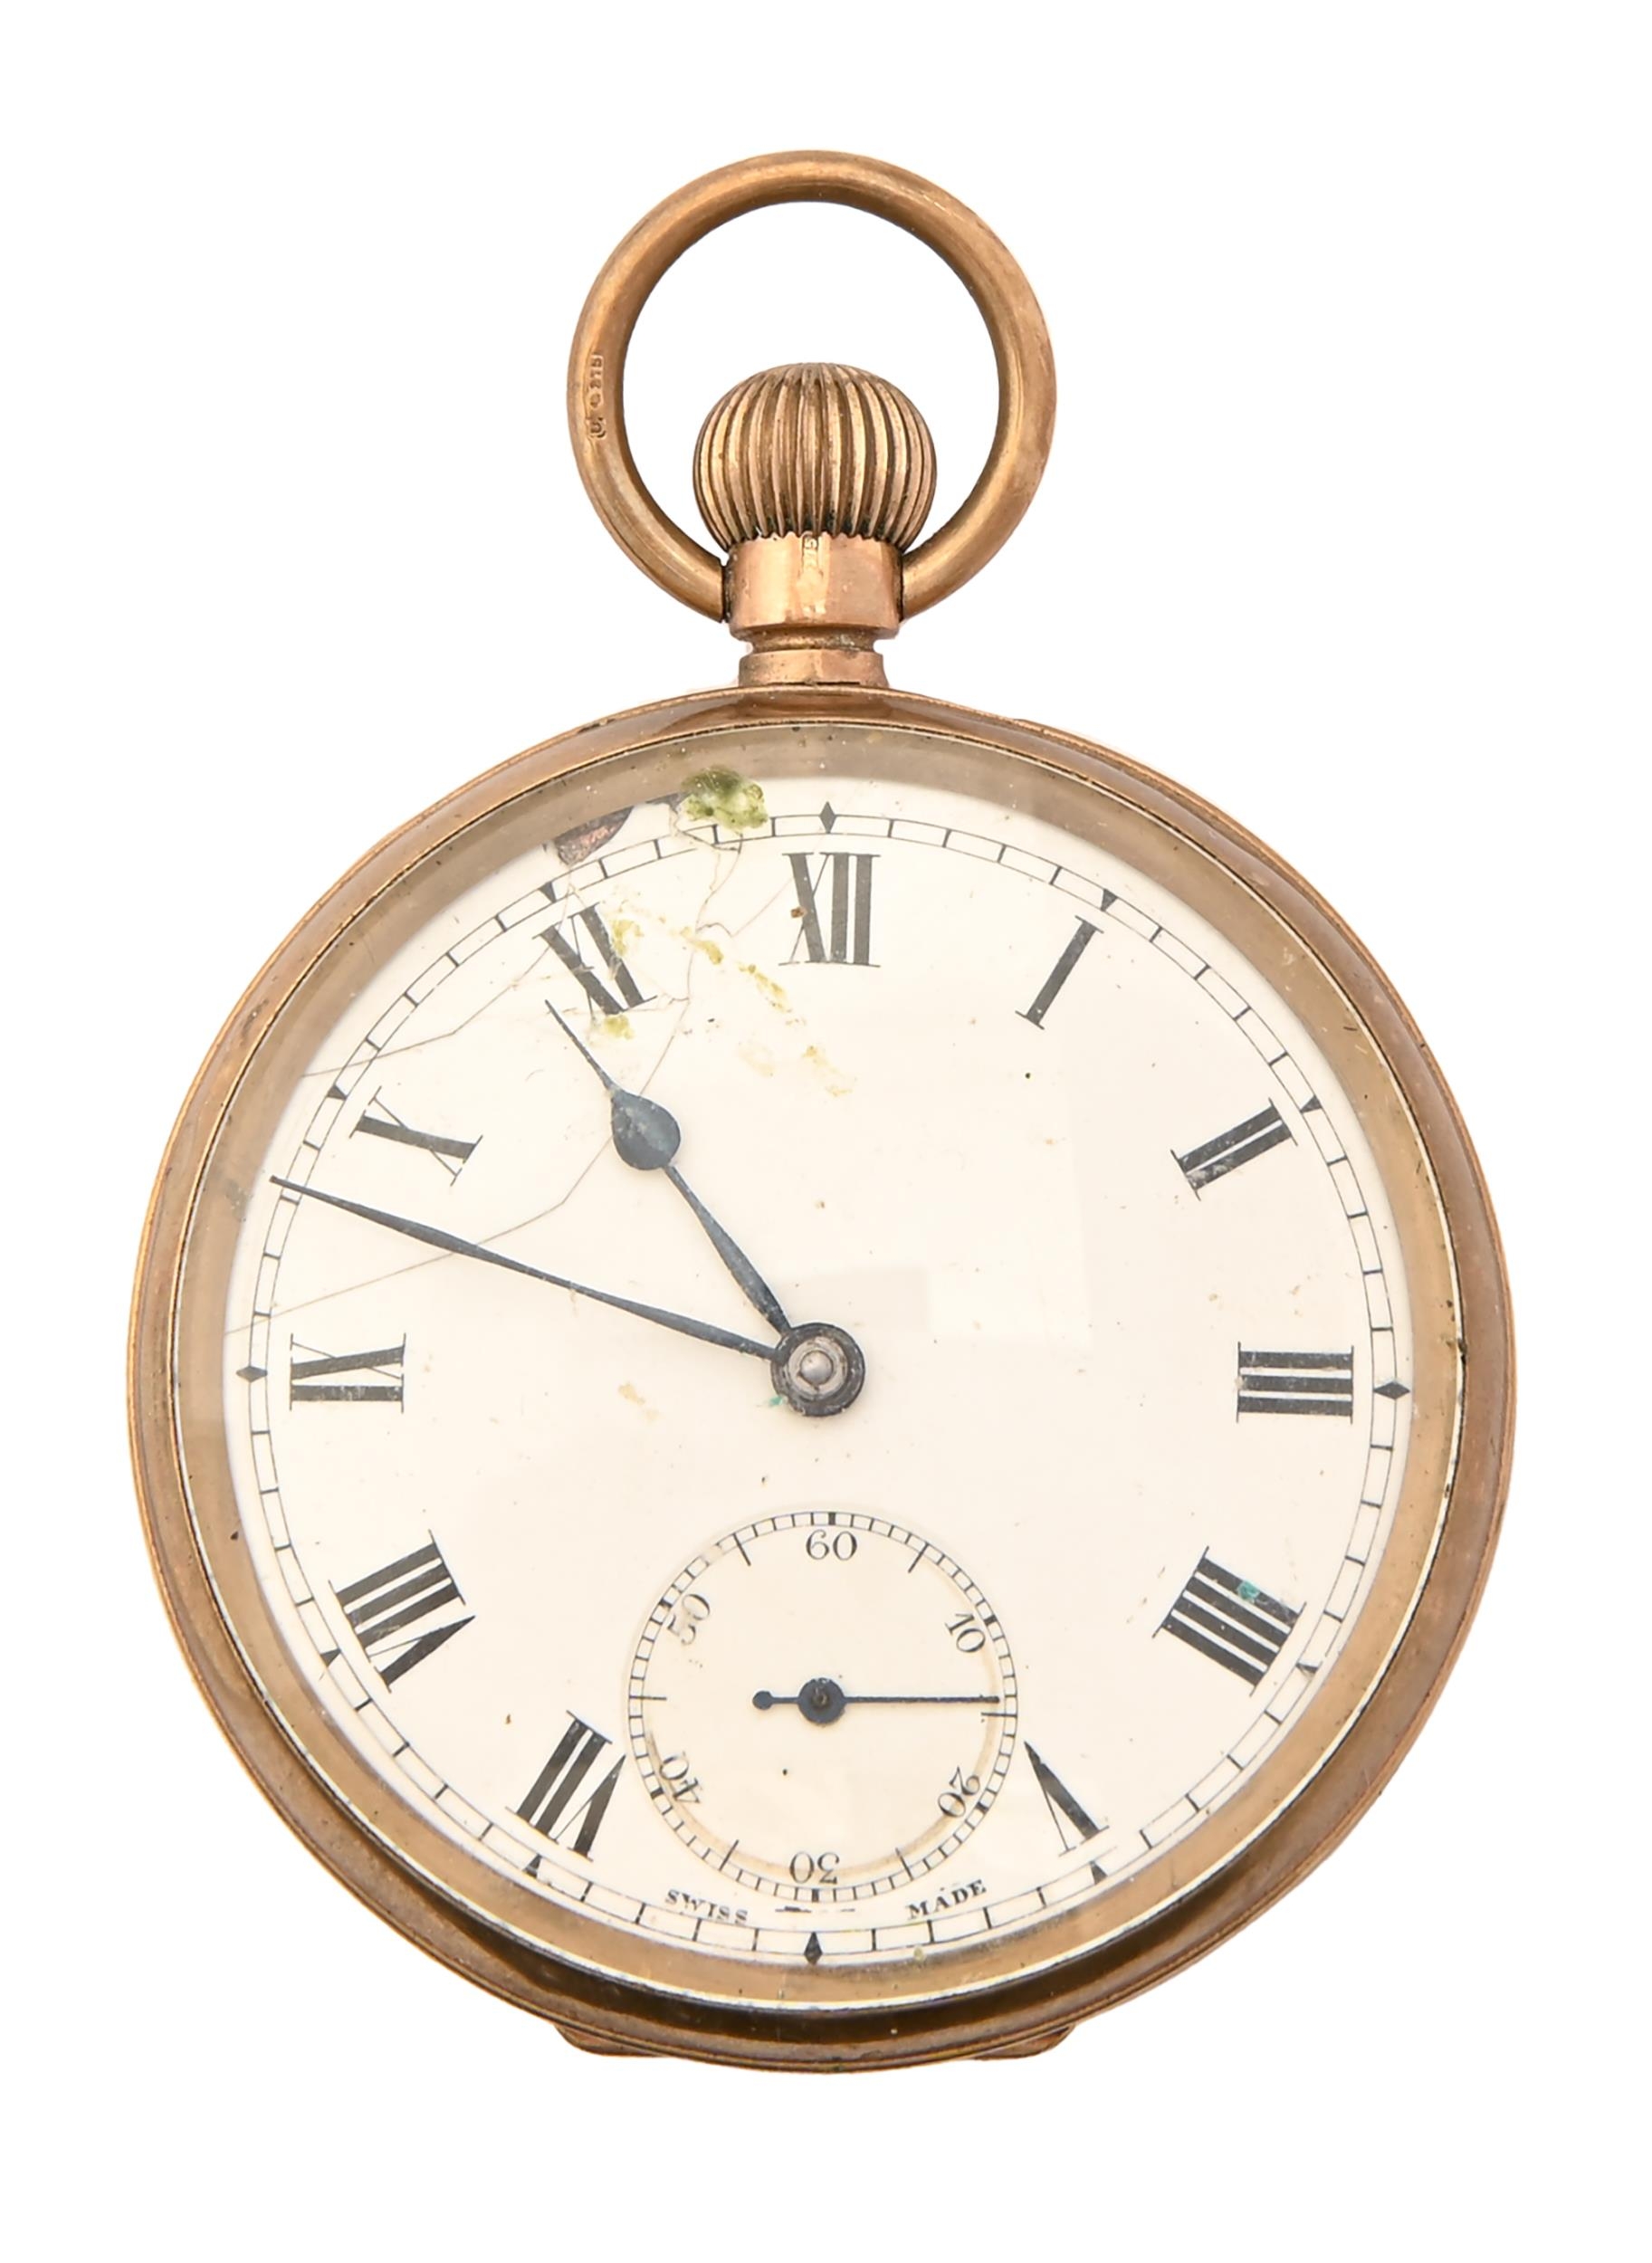 A 9ct gold keyless lever watch, gold cuvette, 49mm diam, import marked London 1913, 71g Working